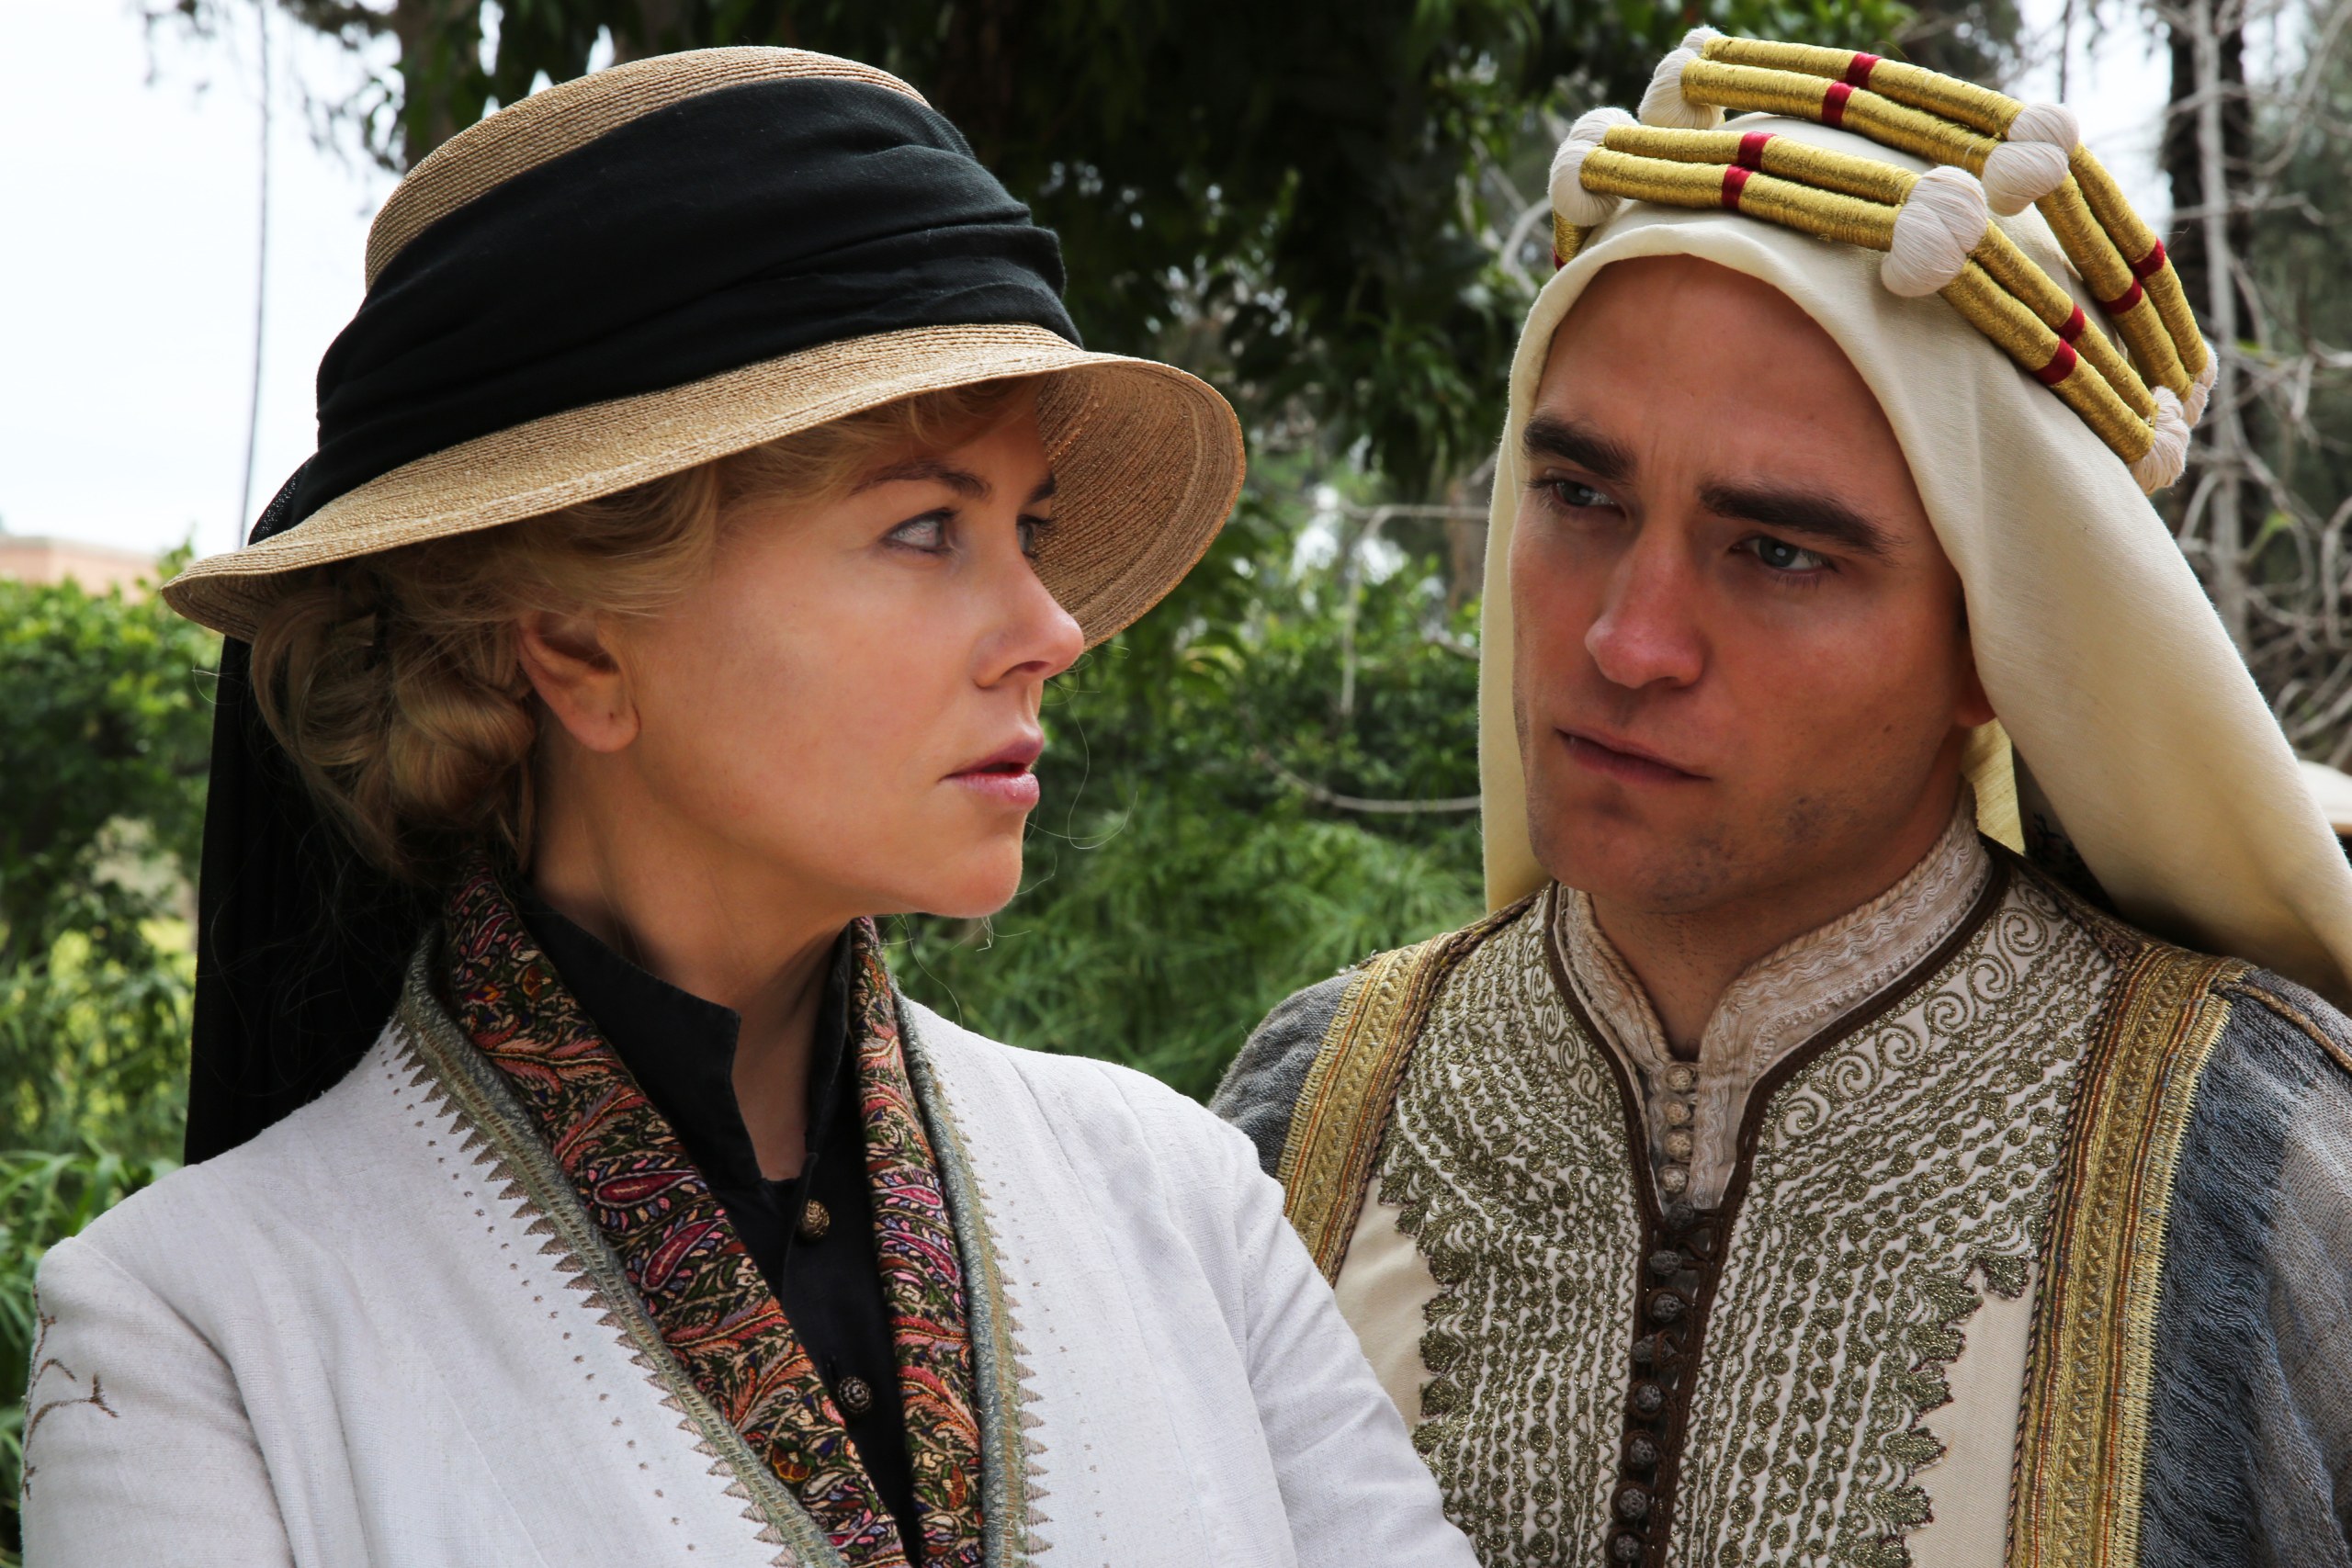 A blond woman wearing a straw hat with a dark ribbon tied around it and a light blouse and a man in an embroidered robe with a head covering look at each other. Behind them you can see green plants.